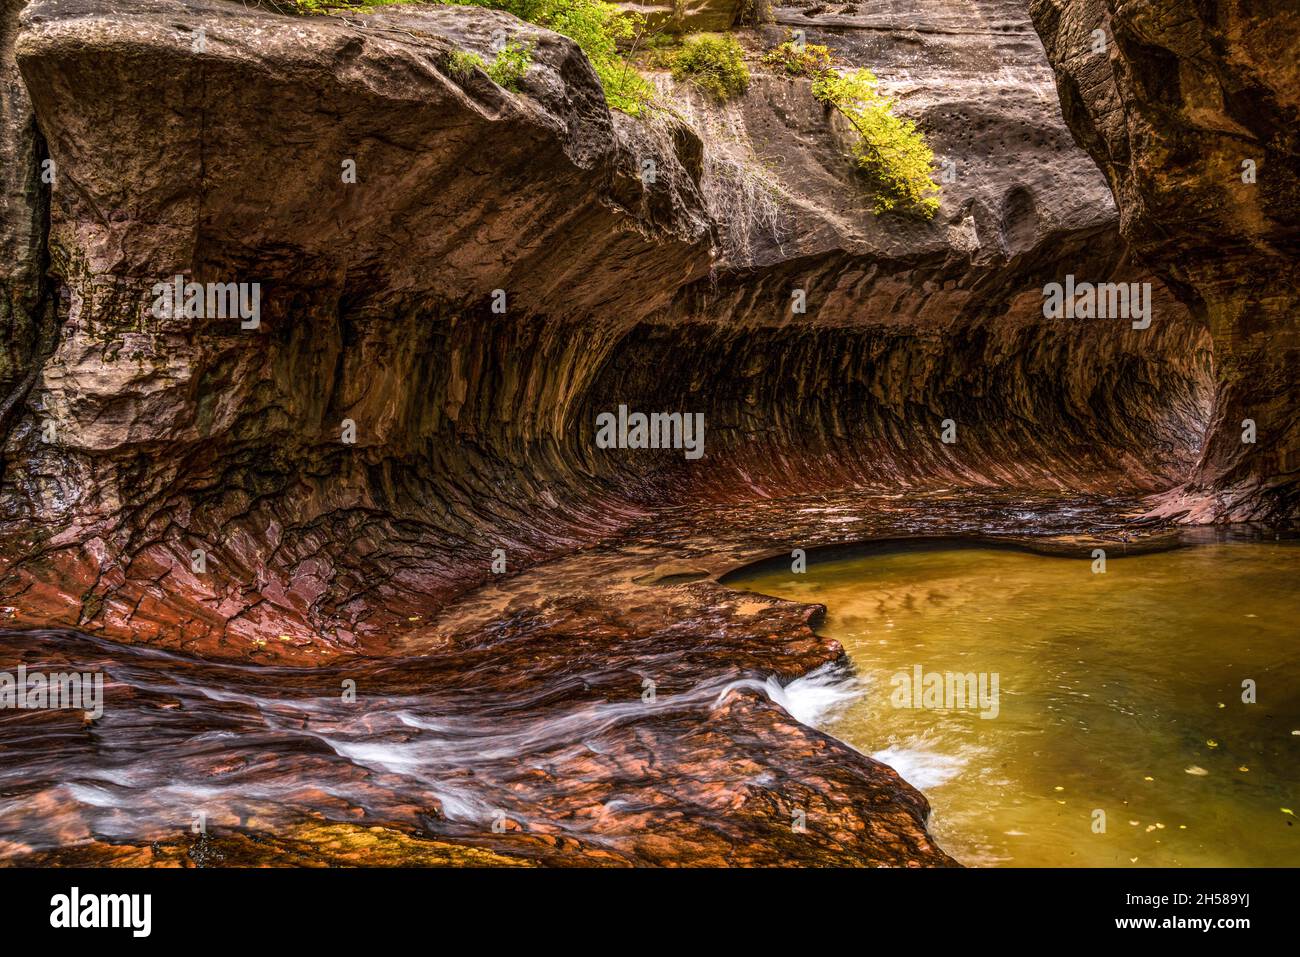 Magnificent Subway gorge landmark in the Zion National Park in Utah, USA Stock Photo